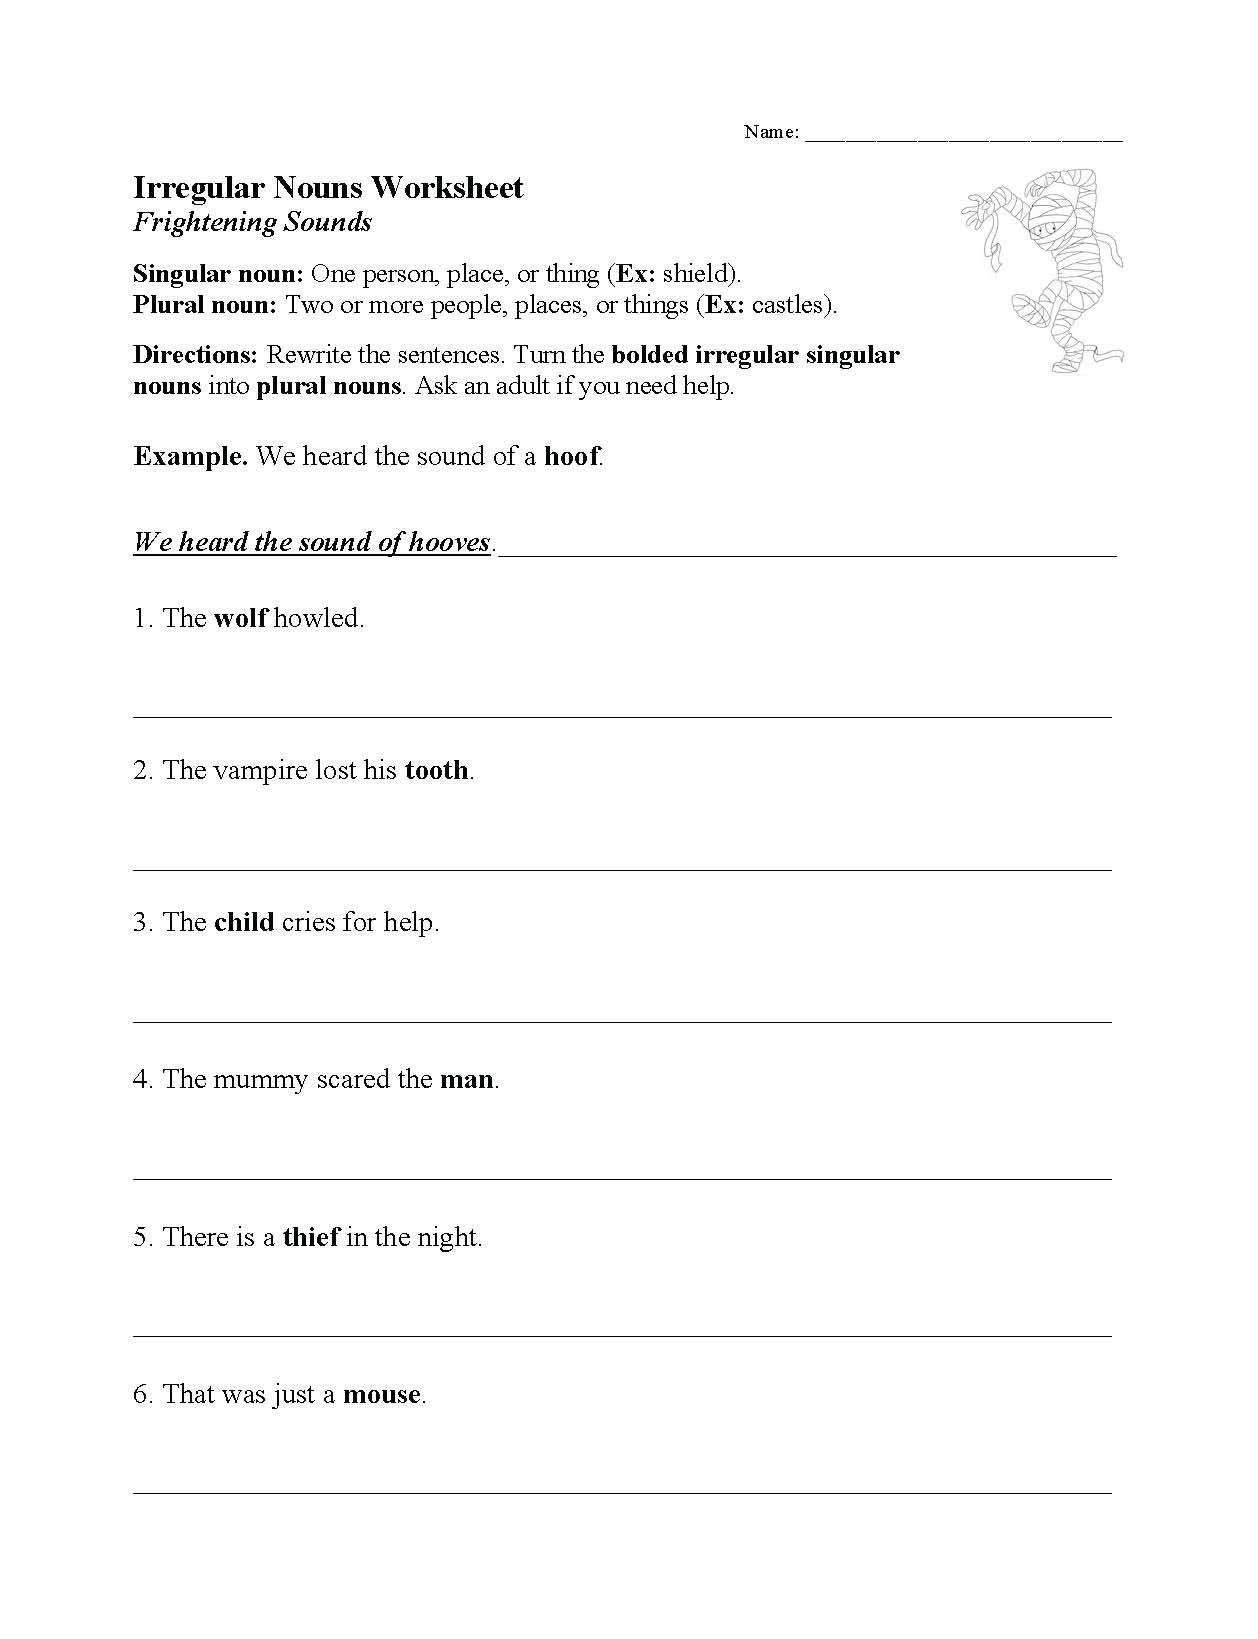 This is a preview image of one of our Parts of Speech Worksheets. Click on it to view all of our parts of speech worksheets.